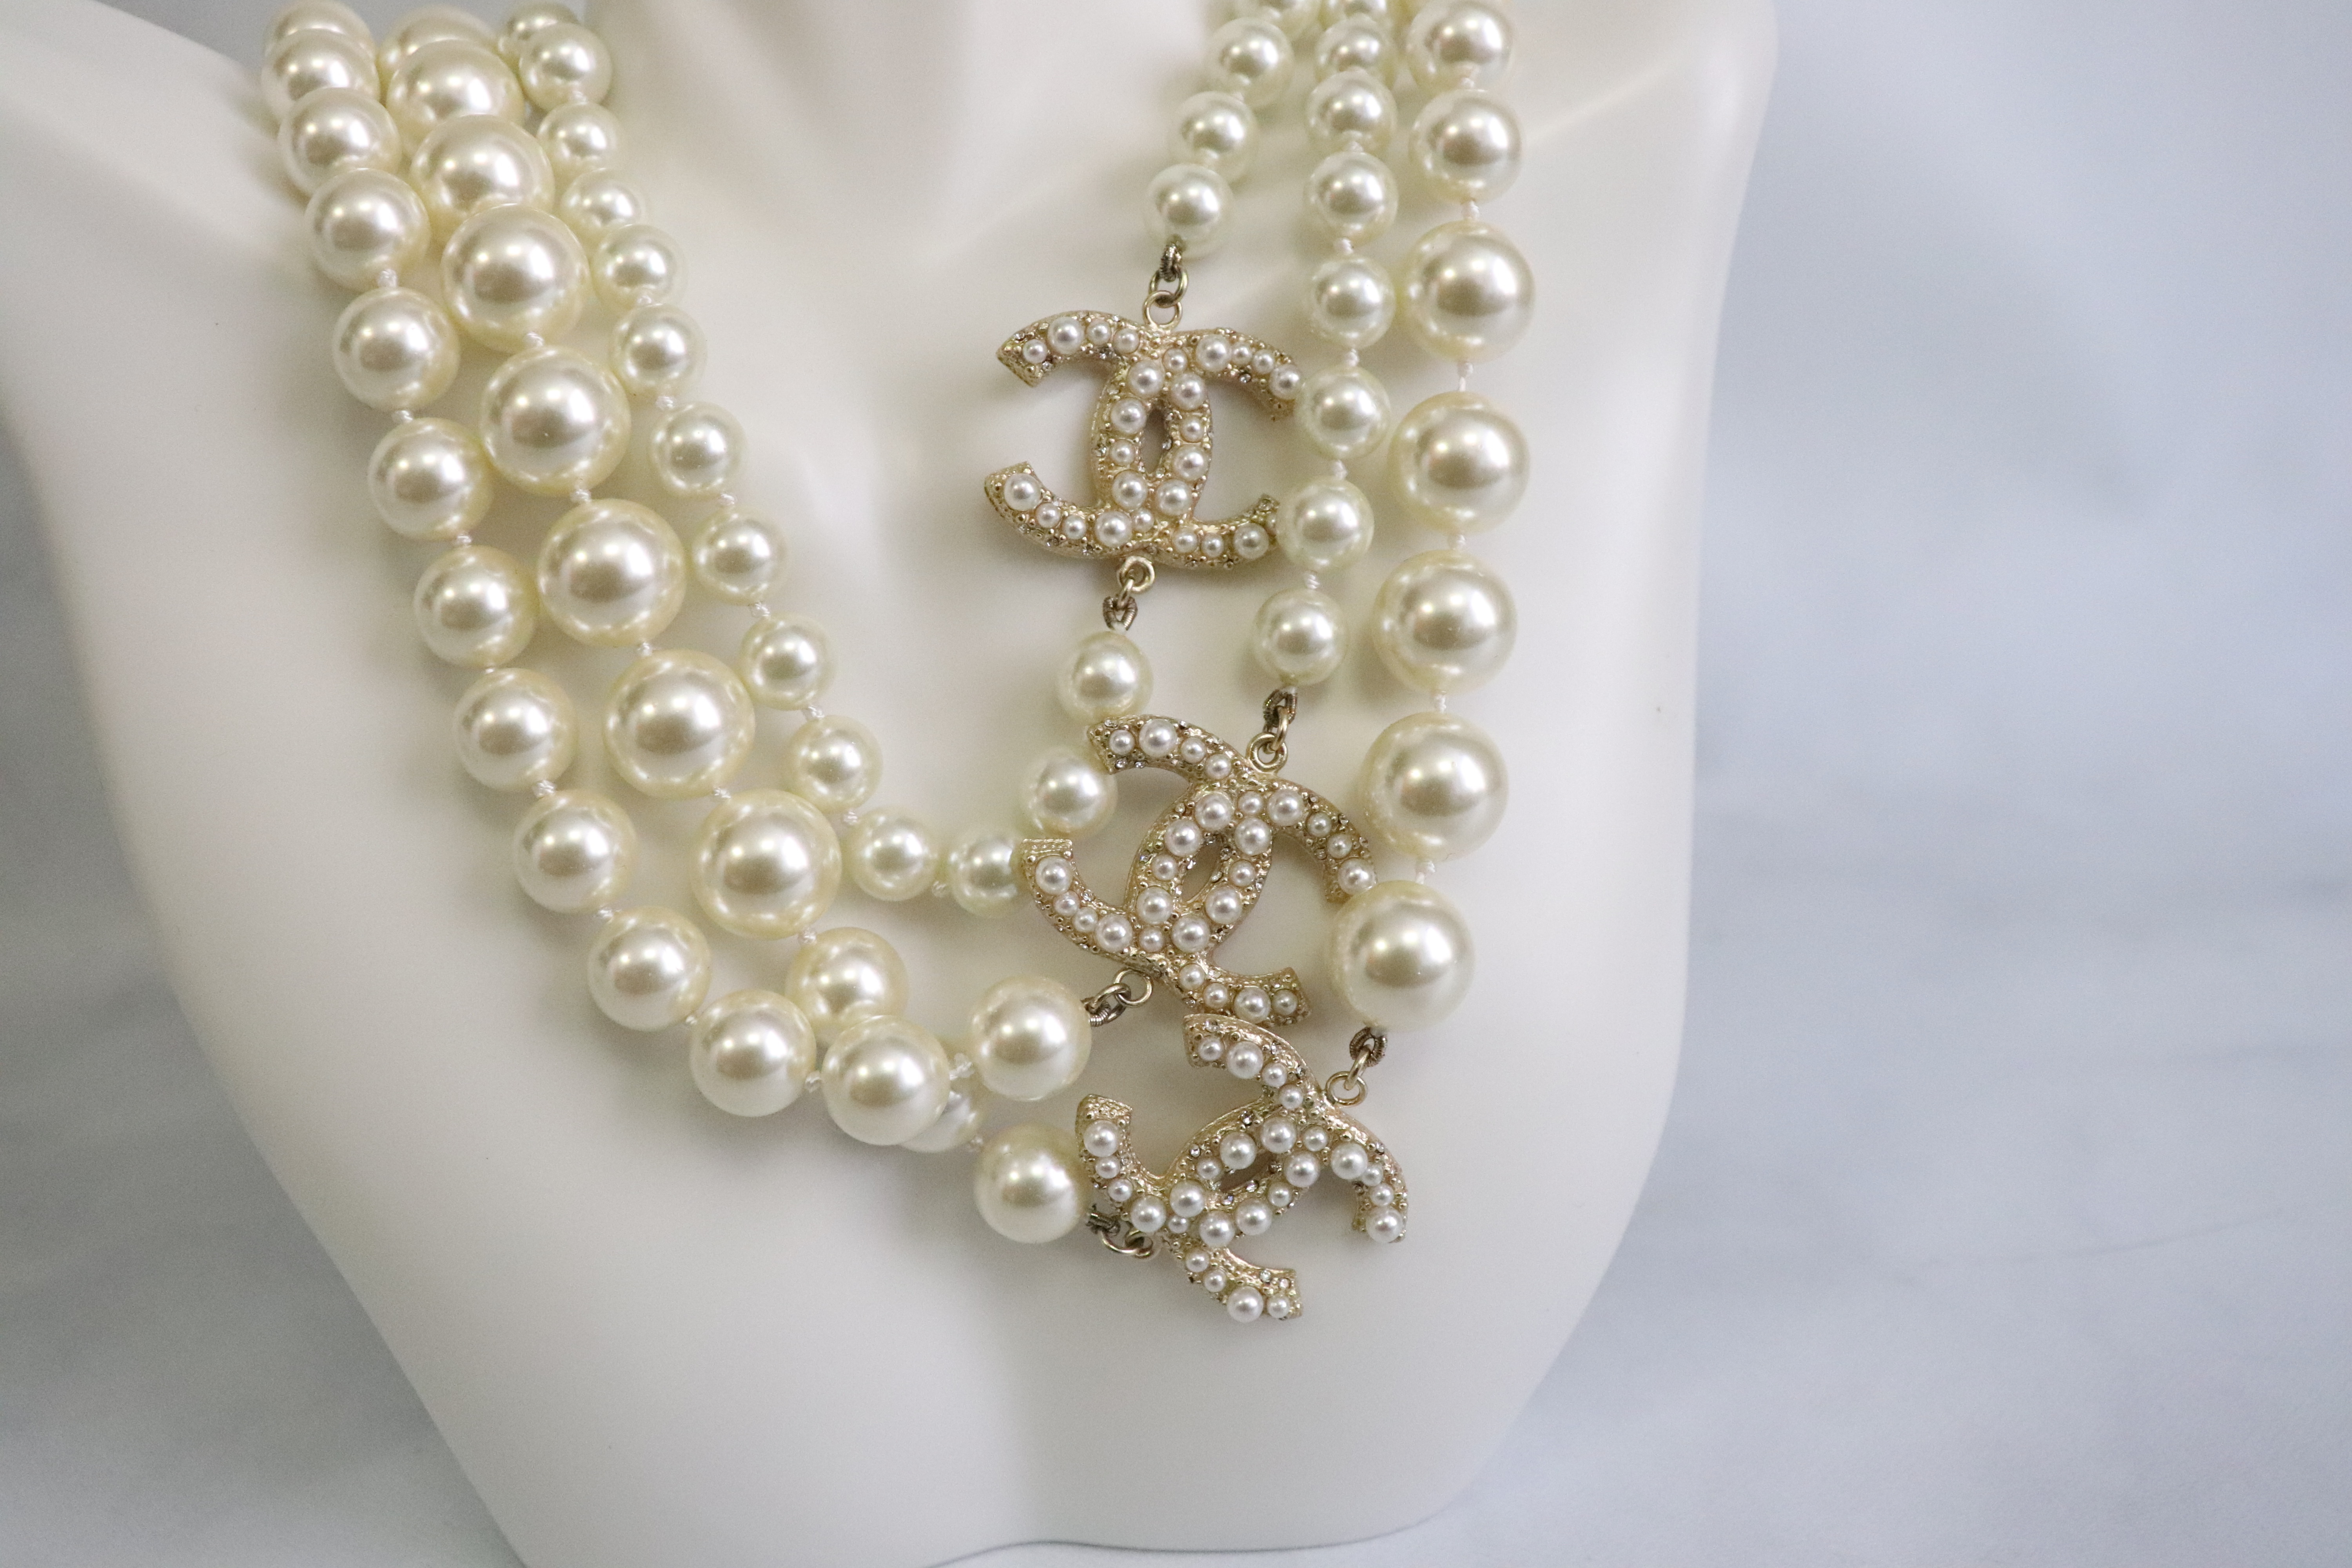 Chanel Necklace, Pearl, 100 year Anniversary Special, Preowned in Box -  Julia Rose Boston